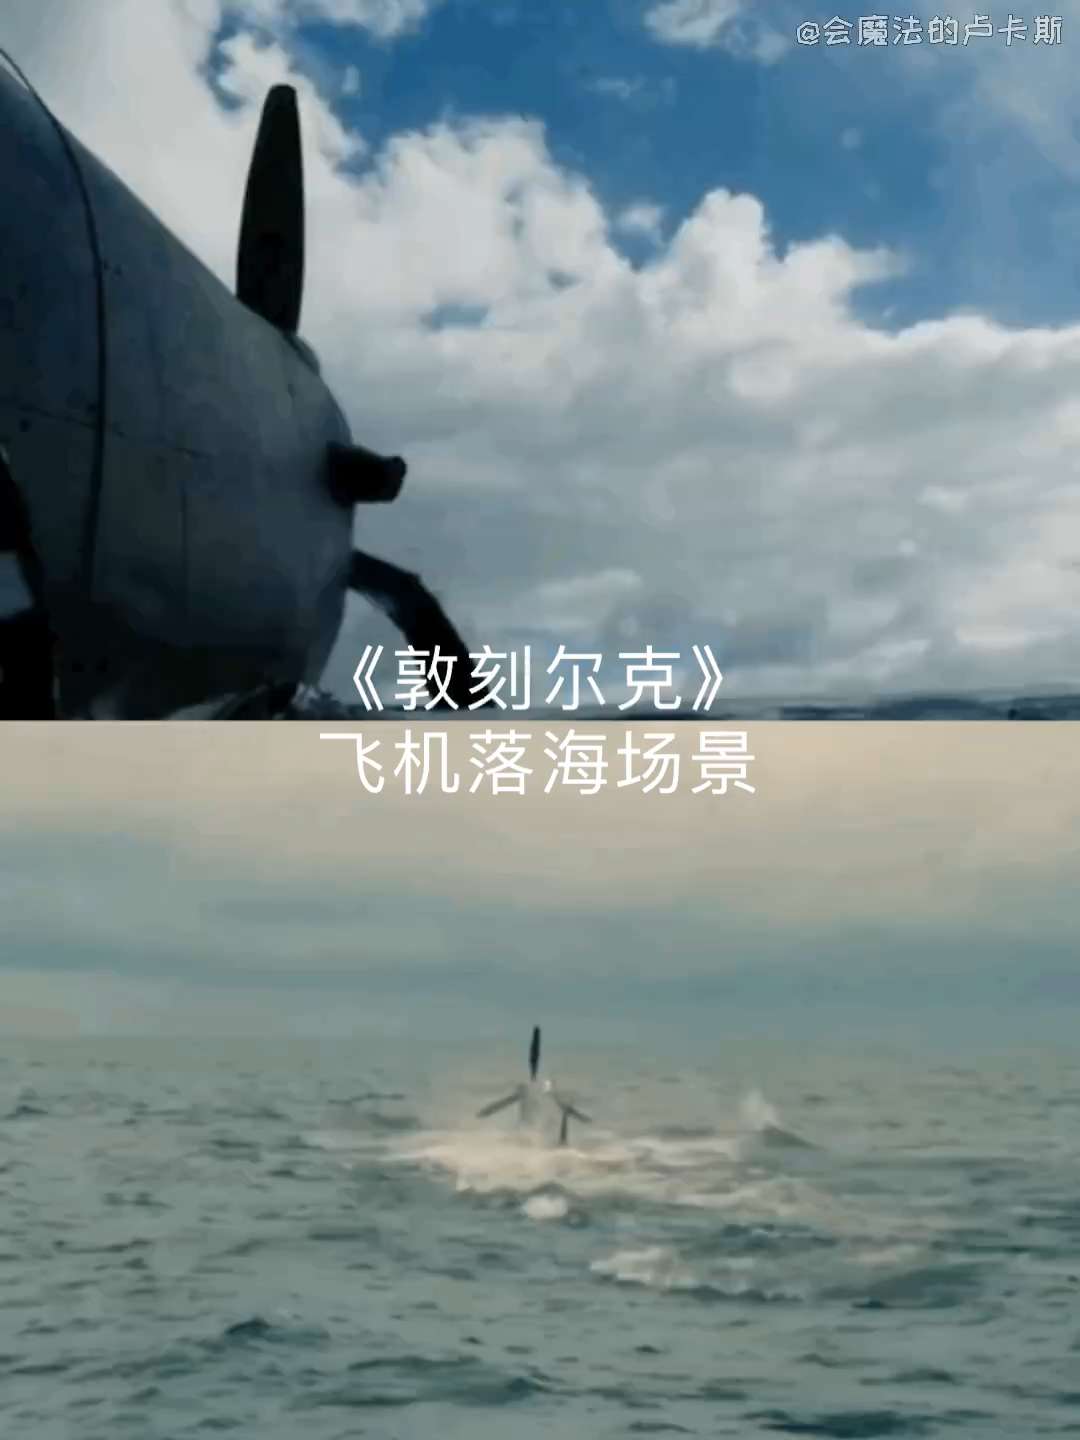 Plane falls overboard in the movie Dunkirk short MP4 video